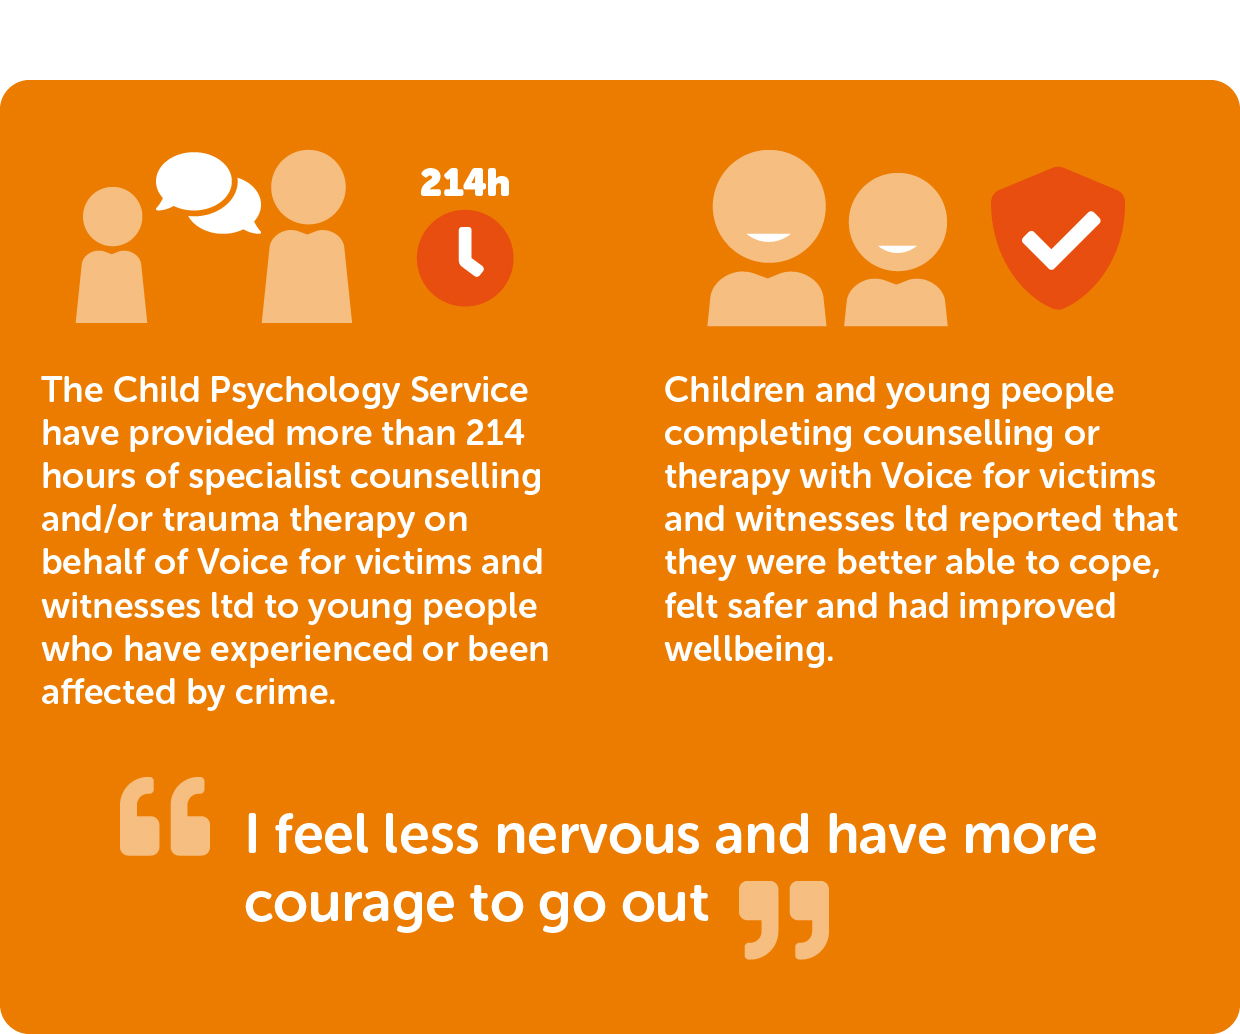 The Child Psychology Service have provided more than 214 hours of specialist counselling and/or trauma therapy on behalf of Voice for victims and witnesses ltd to young people who have experienced or been affected by crime. Children and young people completing counselling or therapy with Voice for victims and witnesses ltd reported that they were better able to cope, felt safer and had improved wellbeing. “I feel less nervous and have more courage to go out”